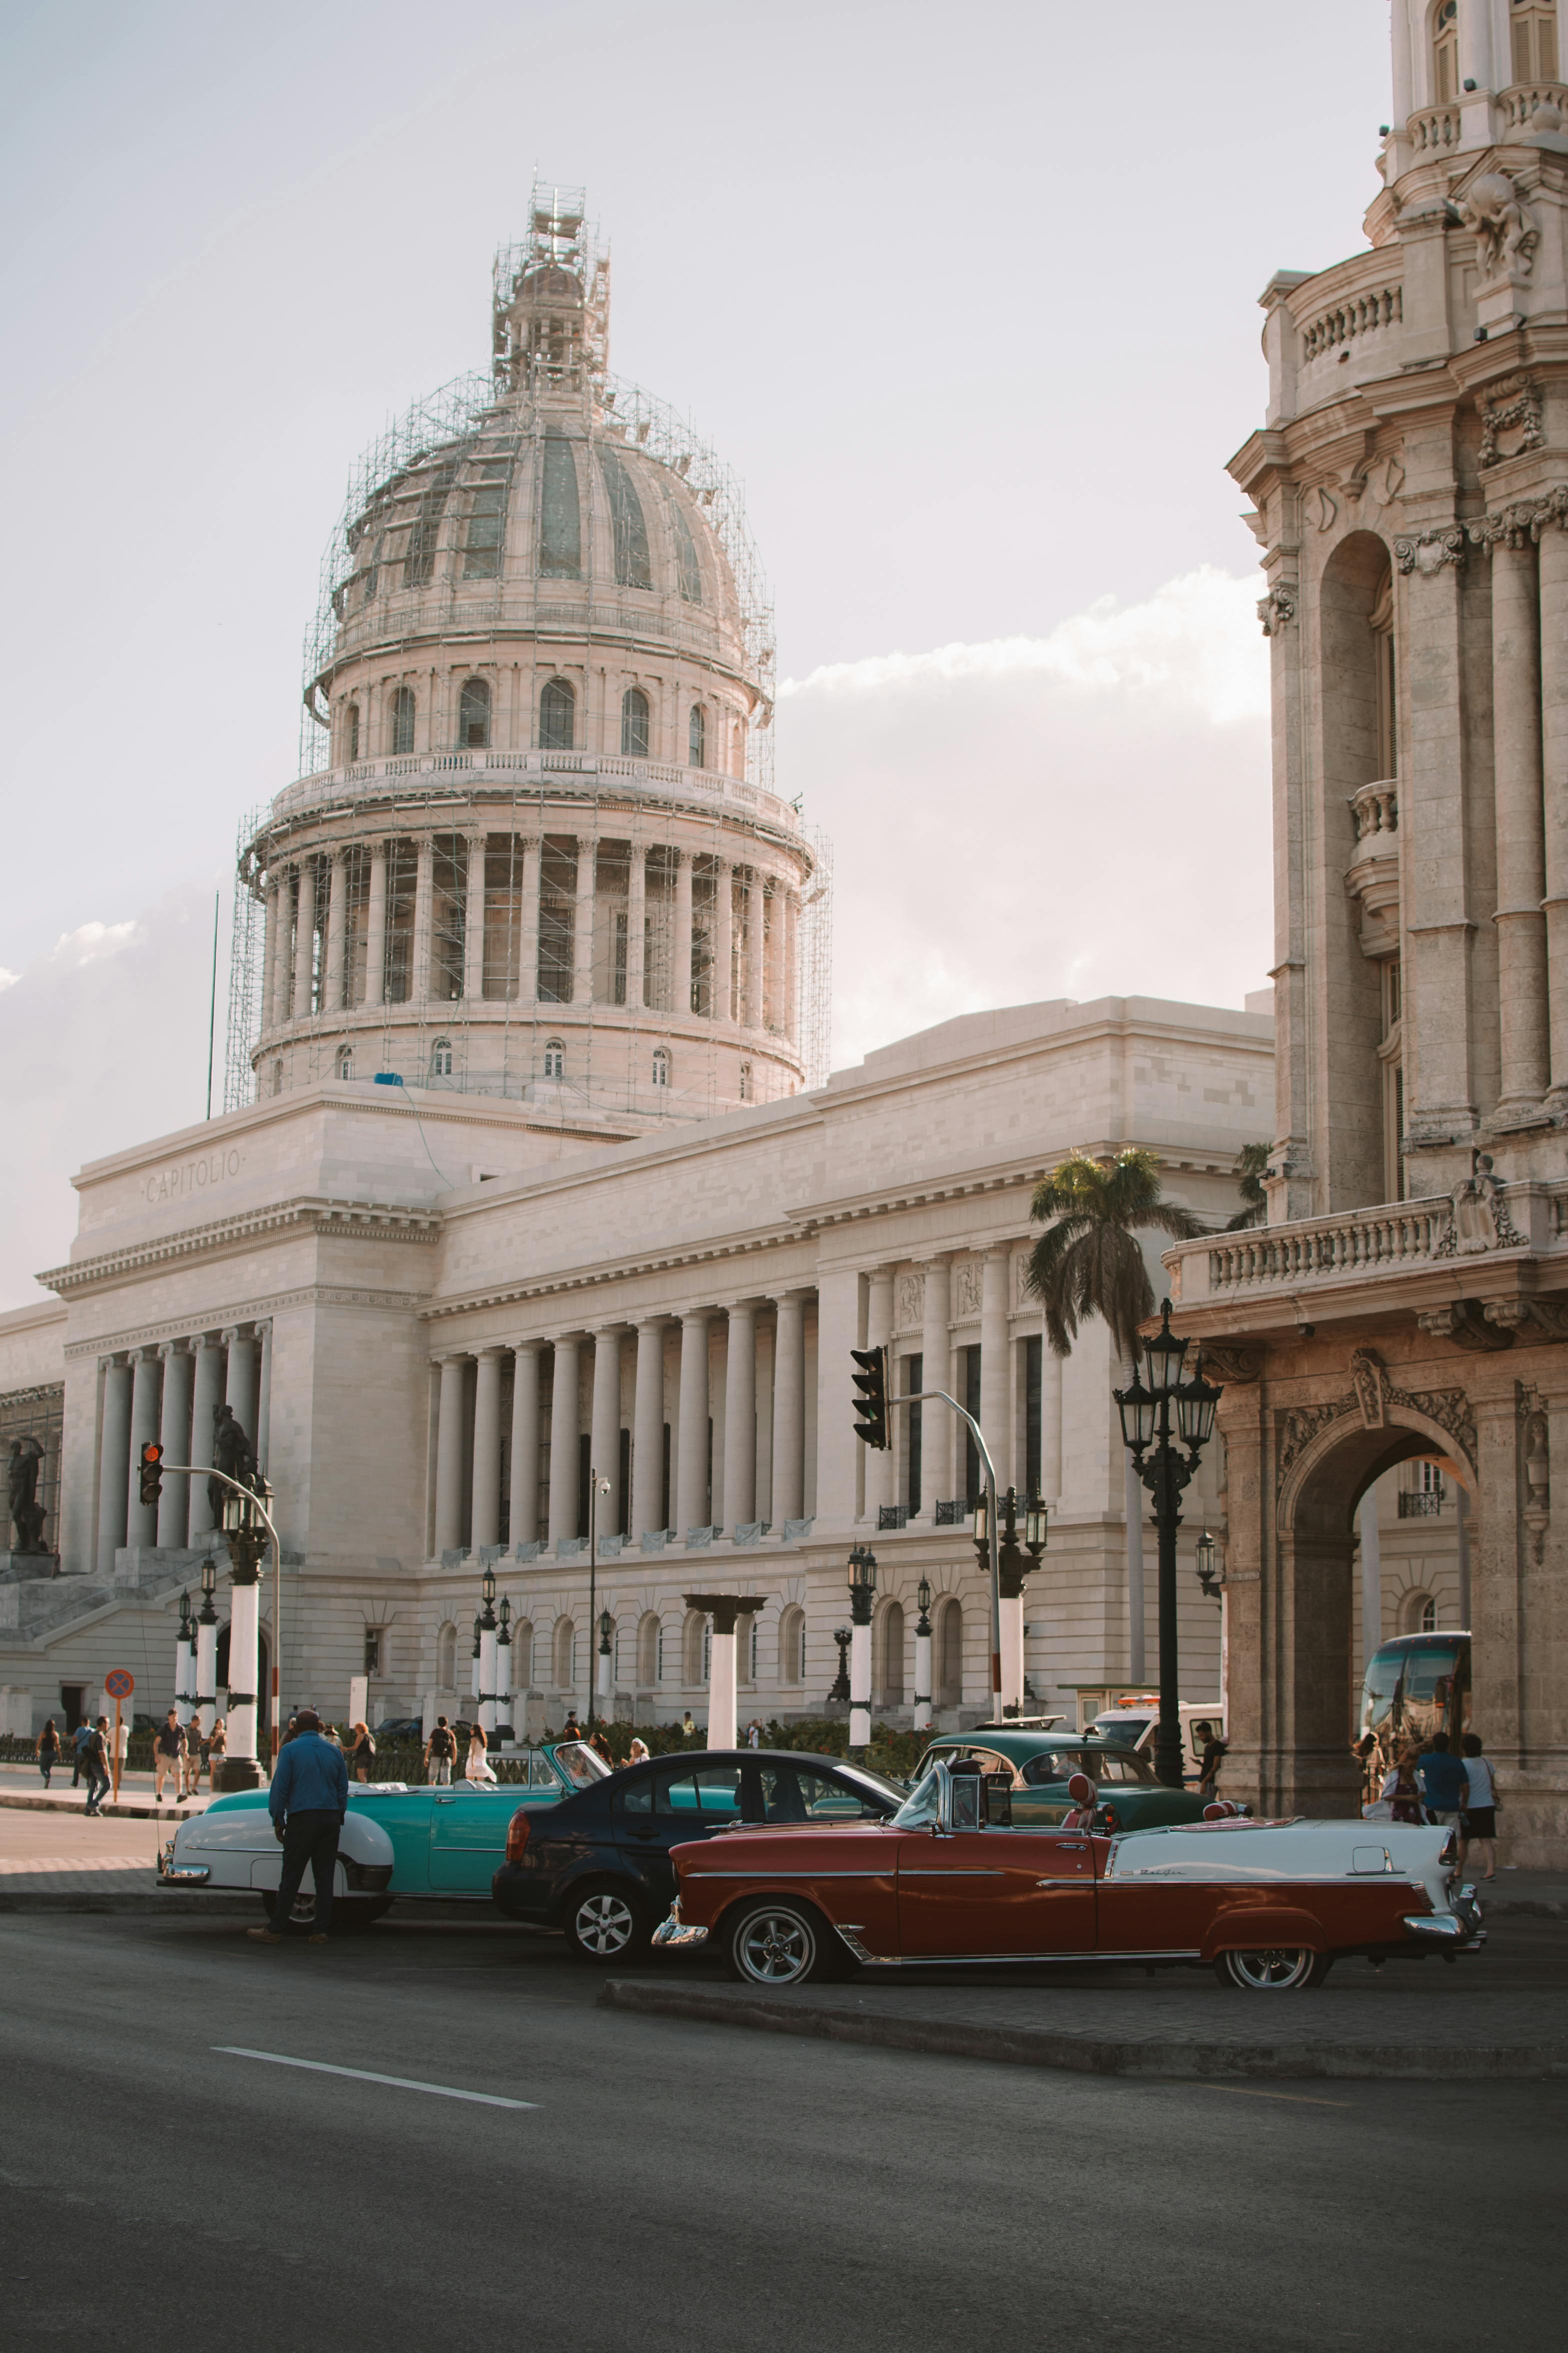 100 Beautiful Cuba Pictures  Download Free Images on Unsplash